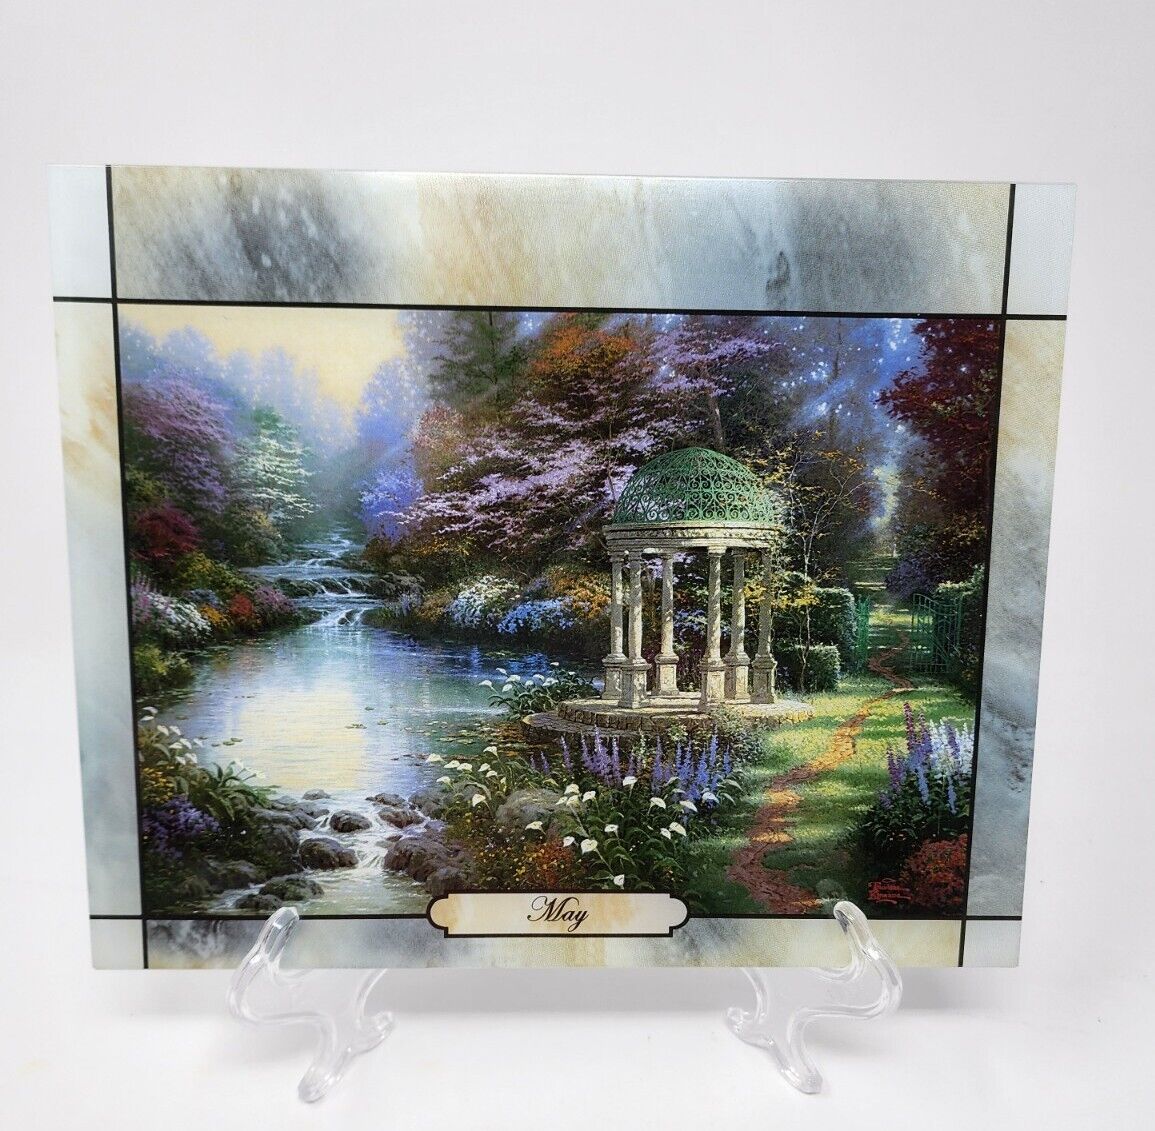 2006 Thomas Kinkade Seasons of Light Stained Glass Calendar Collection MAY